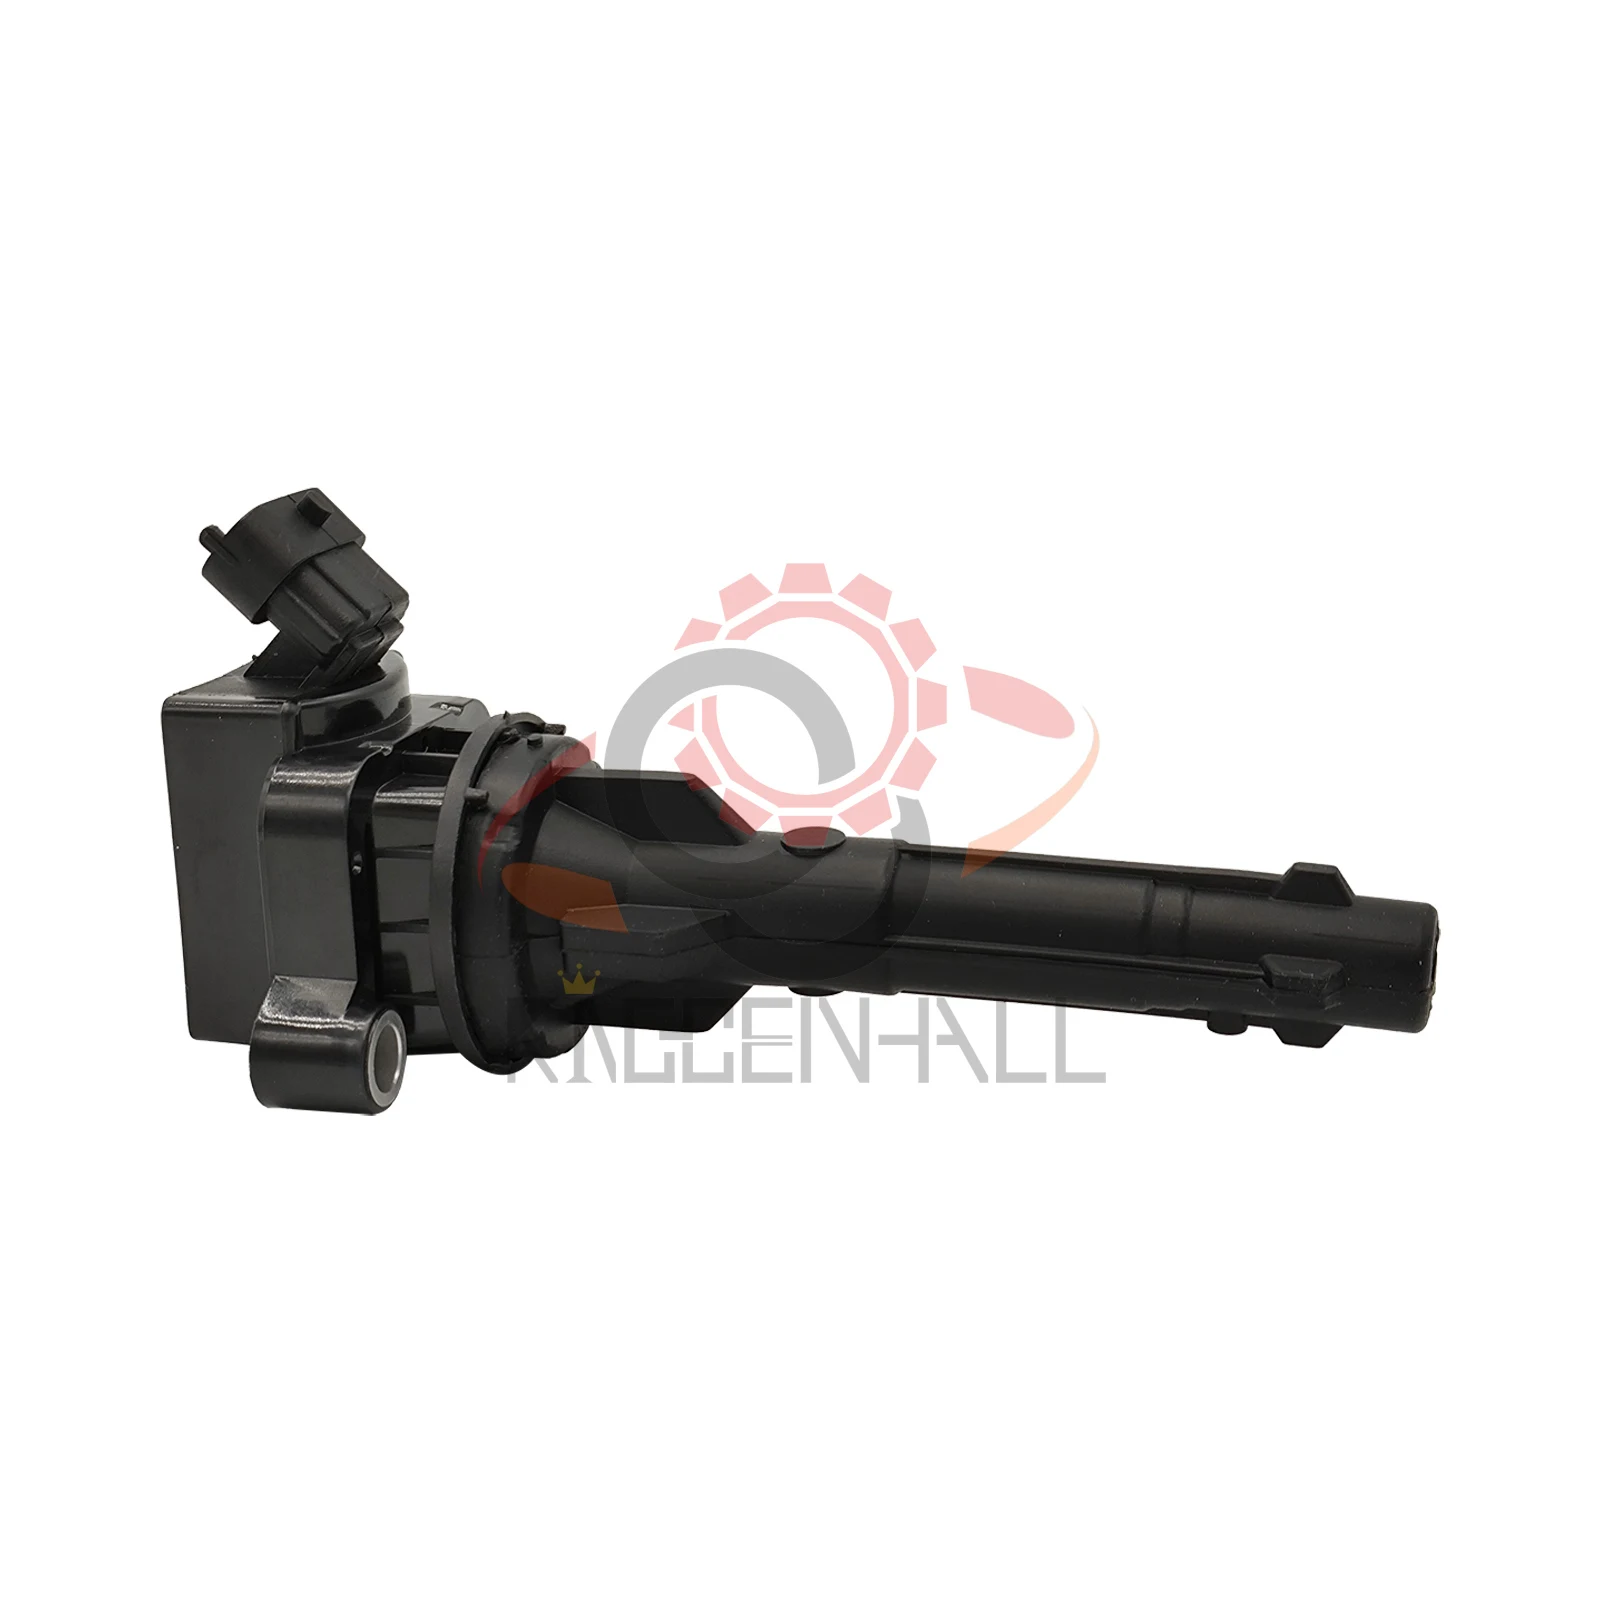 

90080-19017 New Ignition Coil For TOYOTA COROLLA Compact 0221504016 9008019017 900802E11 900801901700